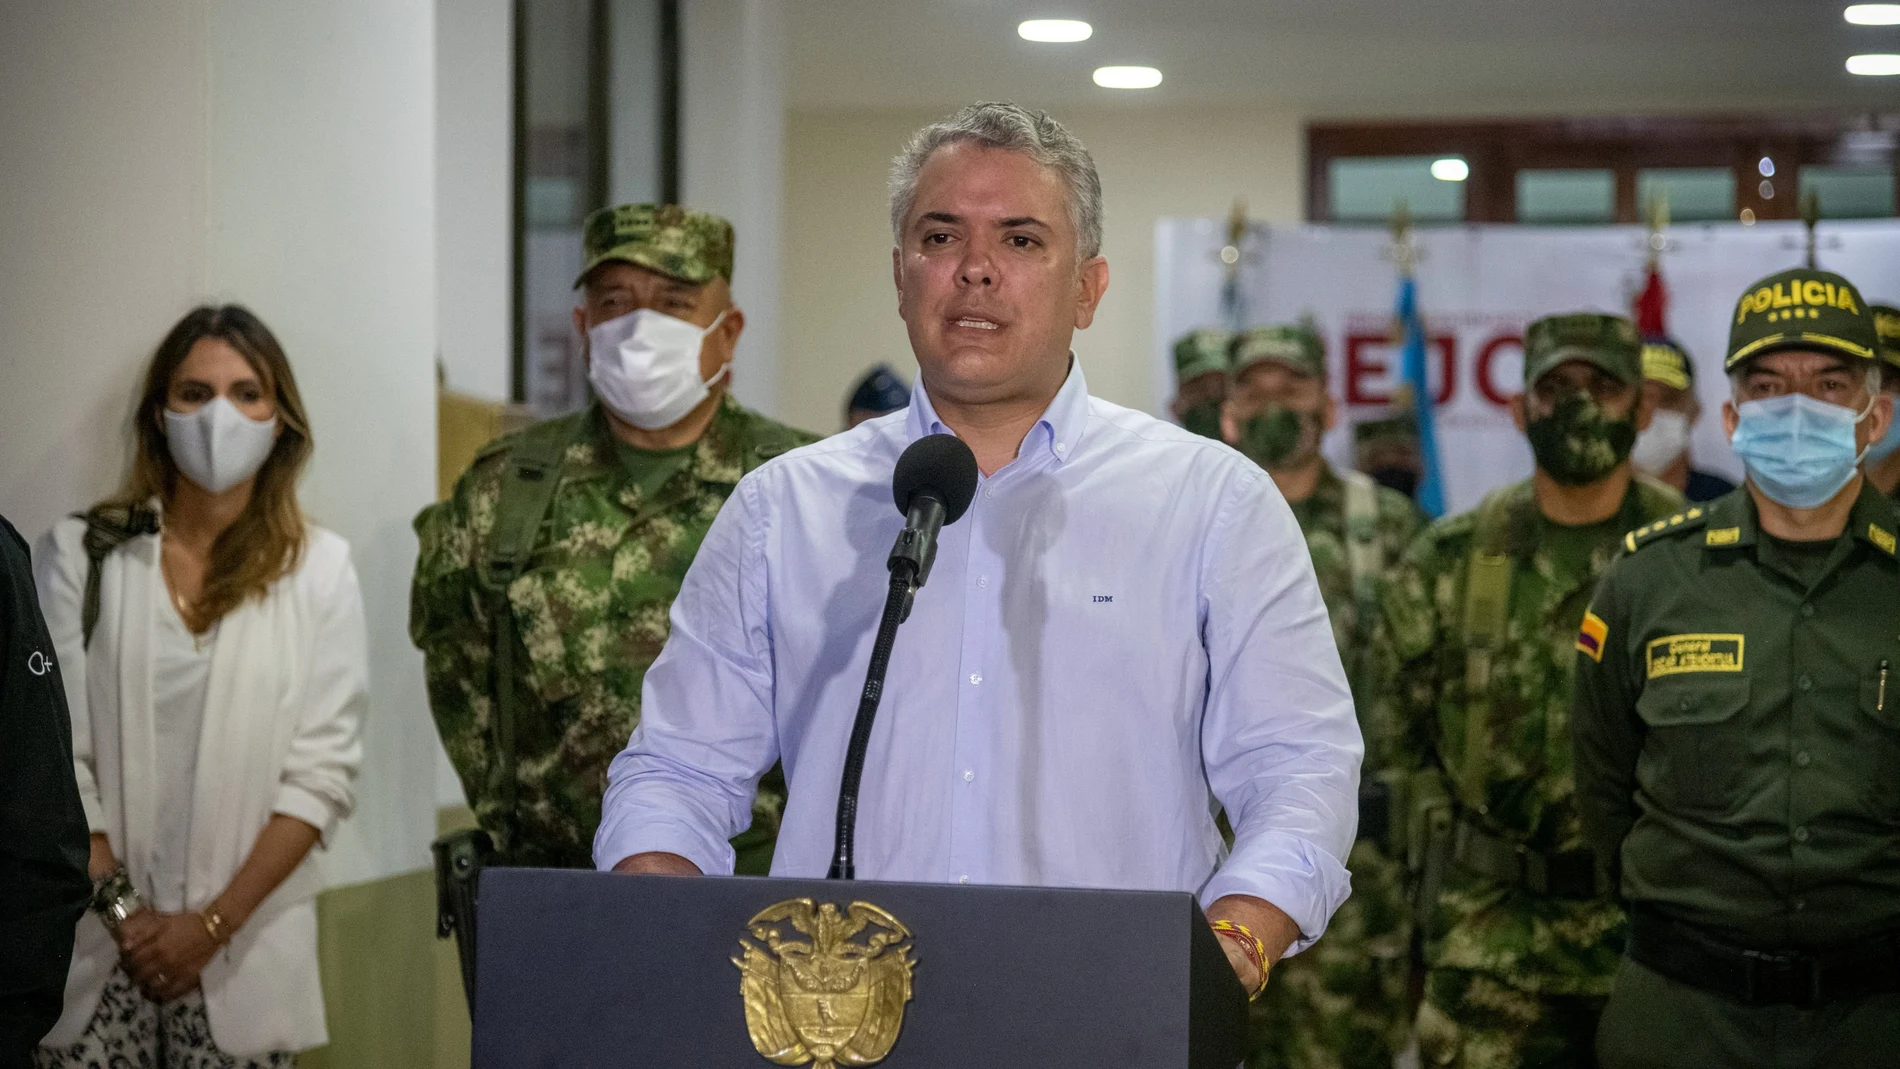 Colombia's President Ivan Duque announces the death of National Liberation Army (ELN) rebel leader Andres Felipe Vanegas Londono, better known by the nom de guerre Uriel, in Quibdo, Colombia October 25, 2020. Courtesy of Colombian Presidency/Handout via REUTERS ATTENTION EDITORS - THIS IMAGE WAS PROVIDED BY A THIRD PARTY. NO RESALES. NO ARCHIVES